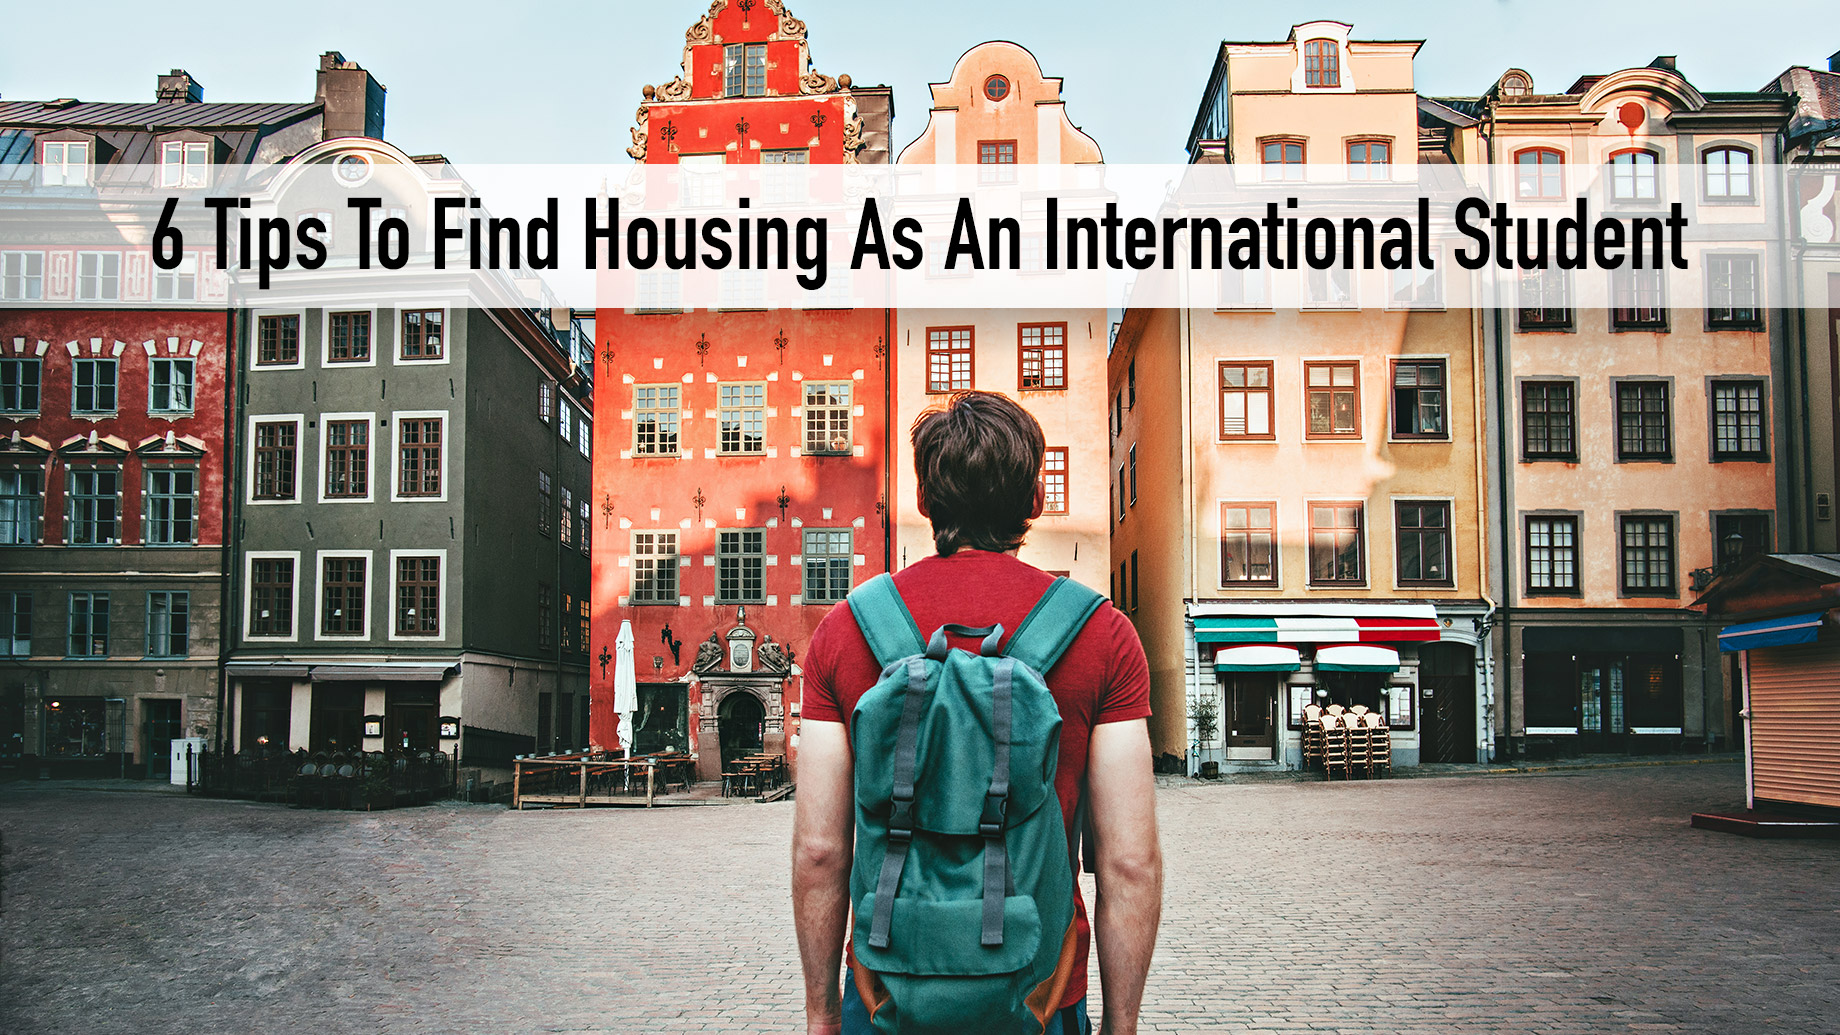 6 Tips To Find Housing As An International Student